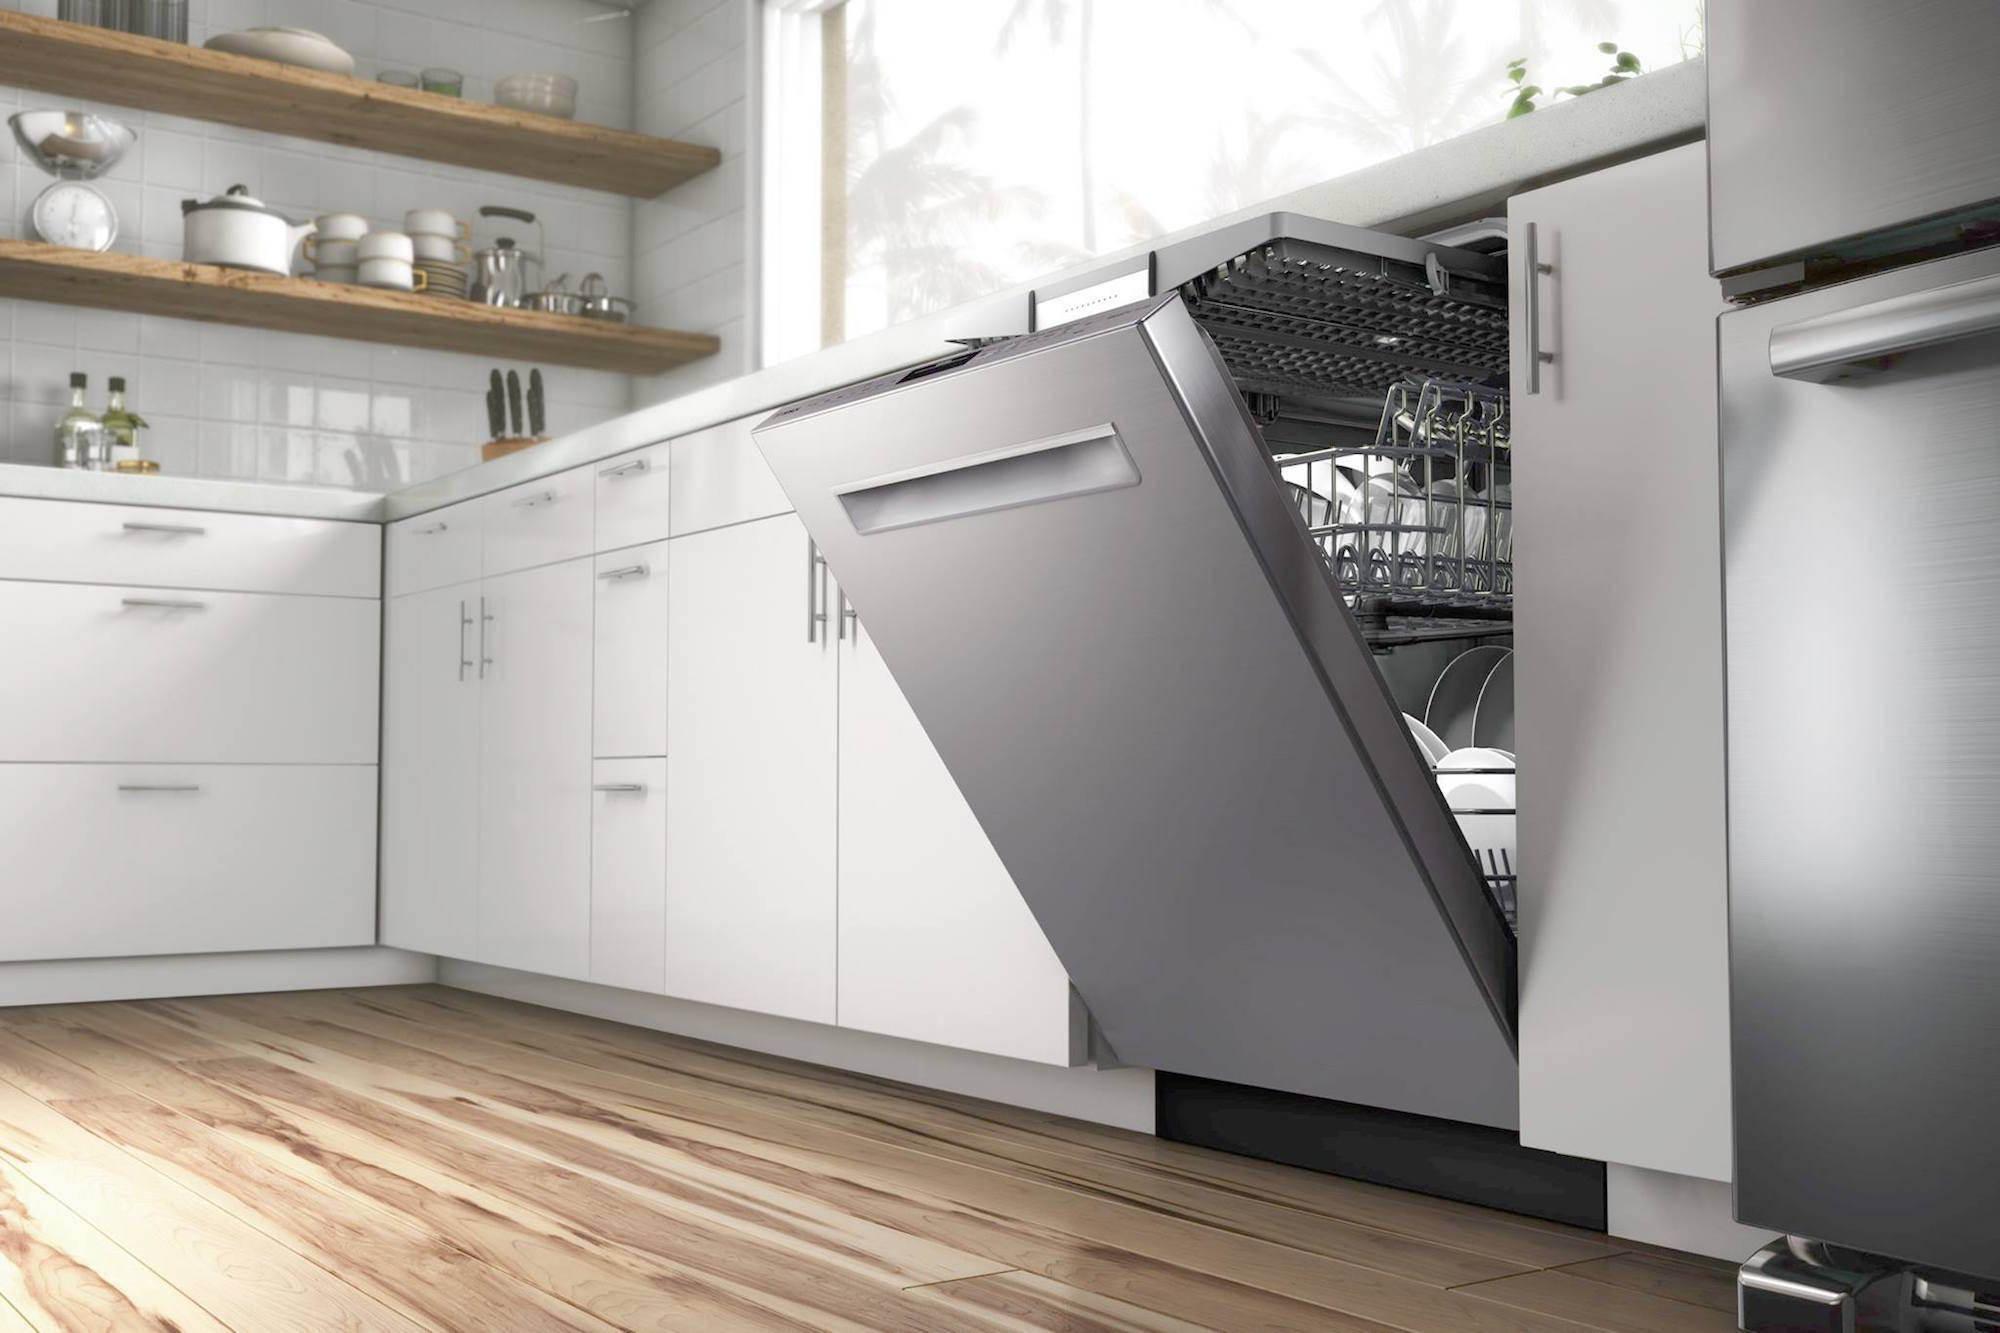 Thousands of dishwashers recalled in Canada